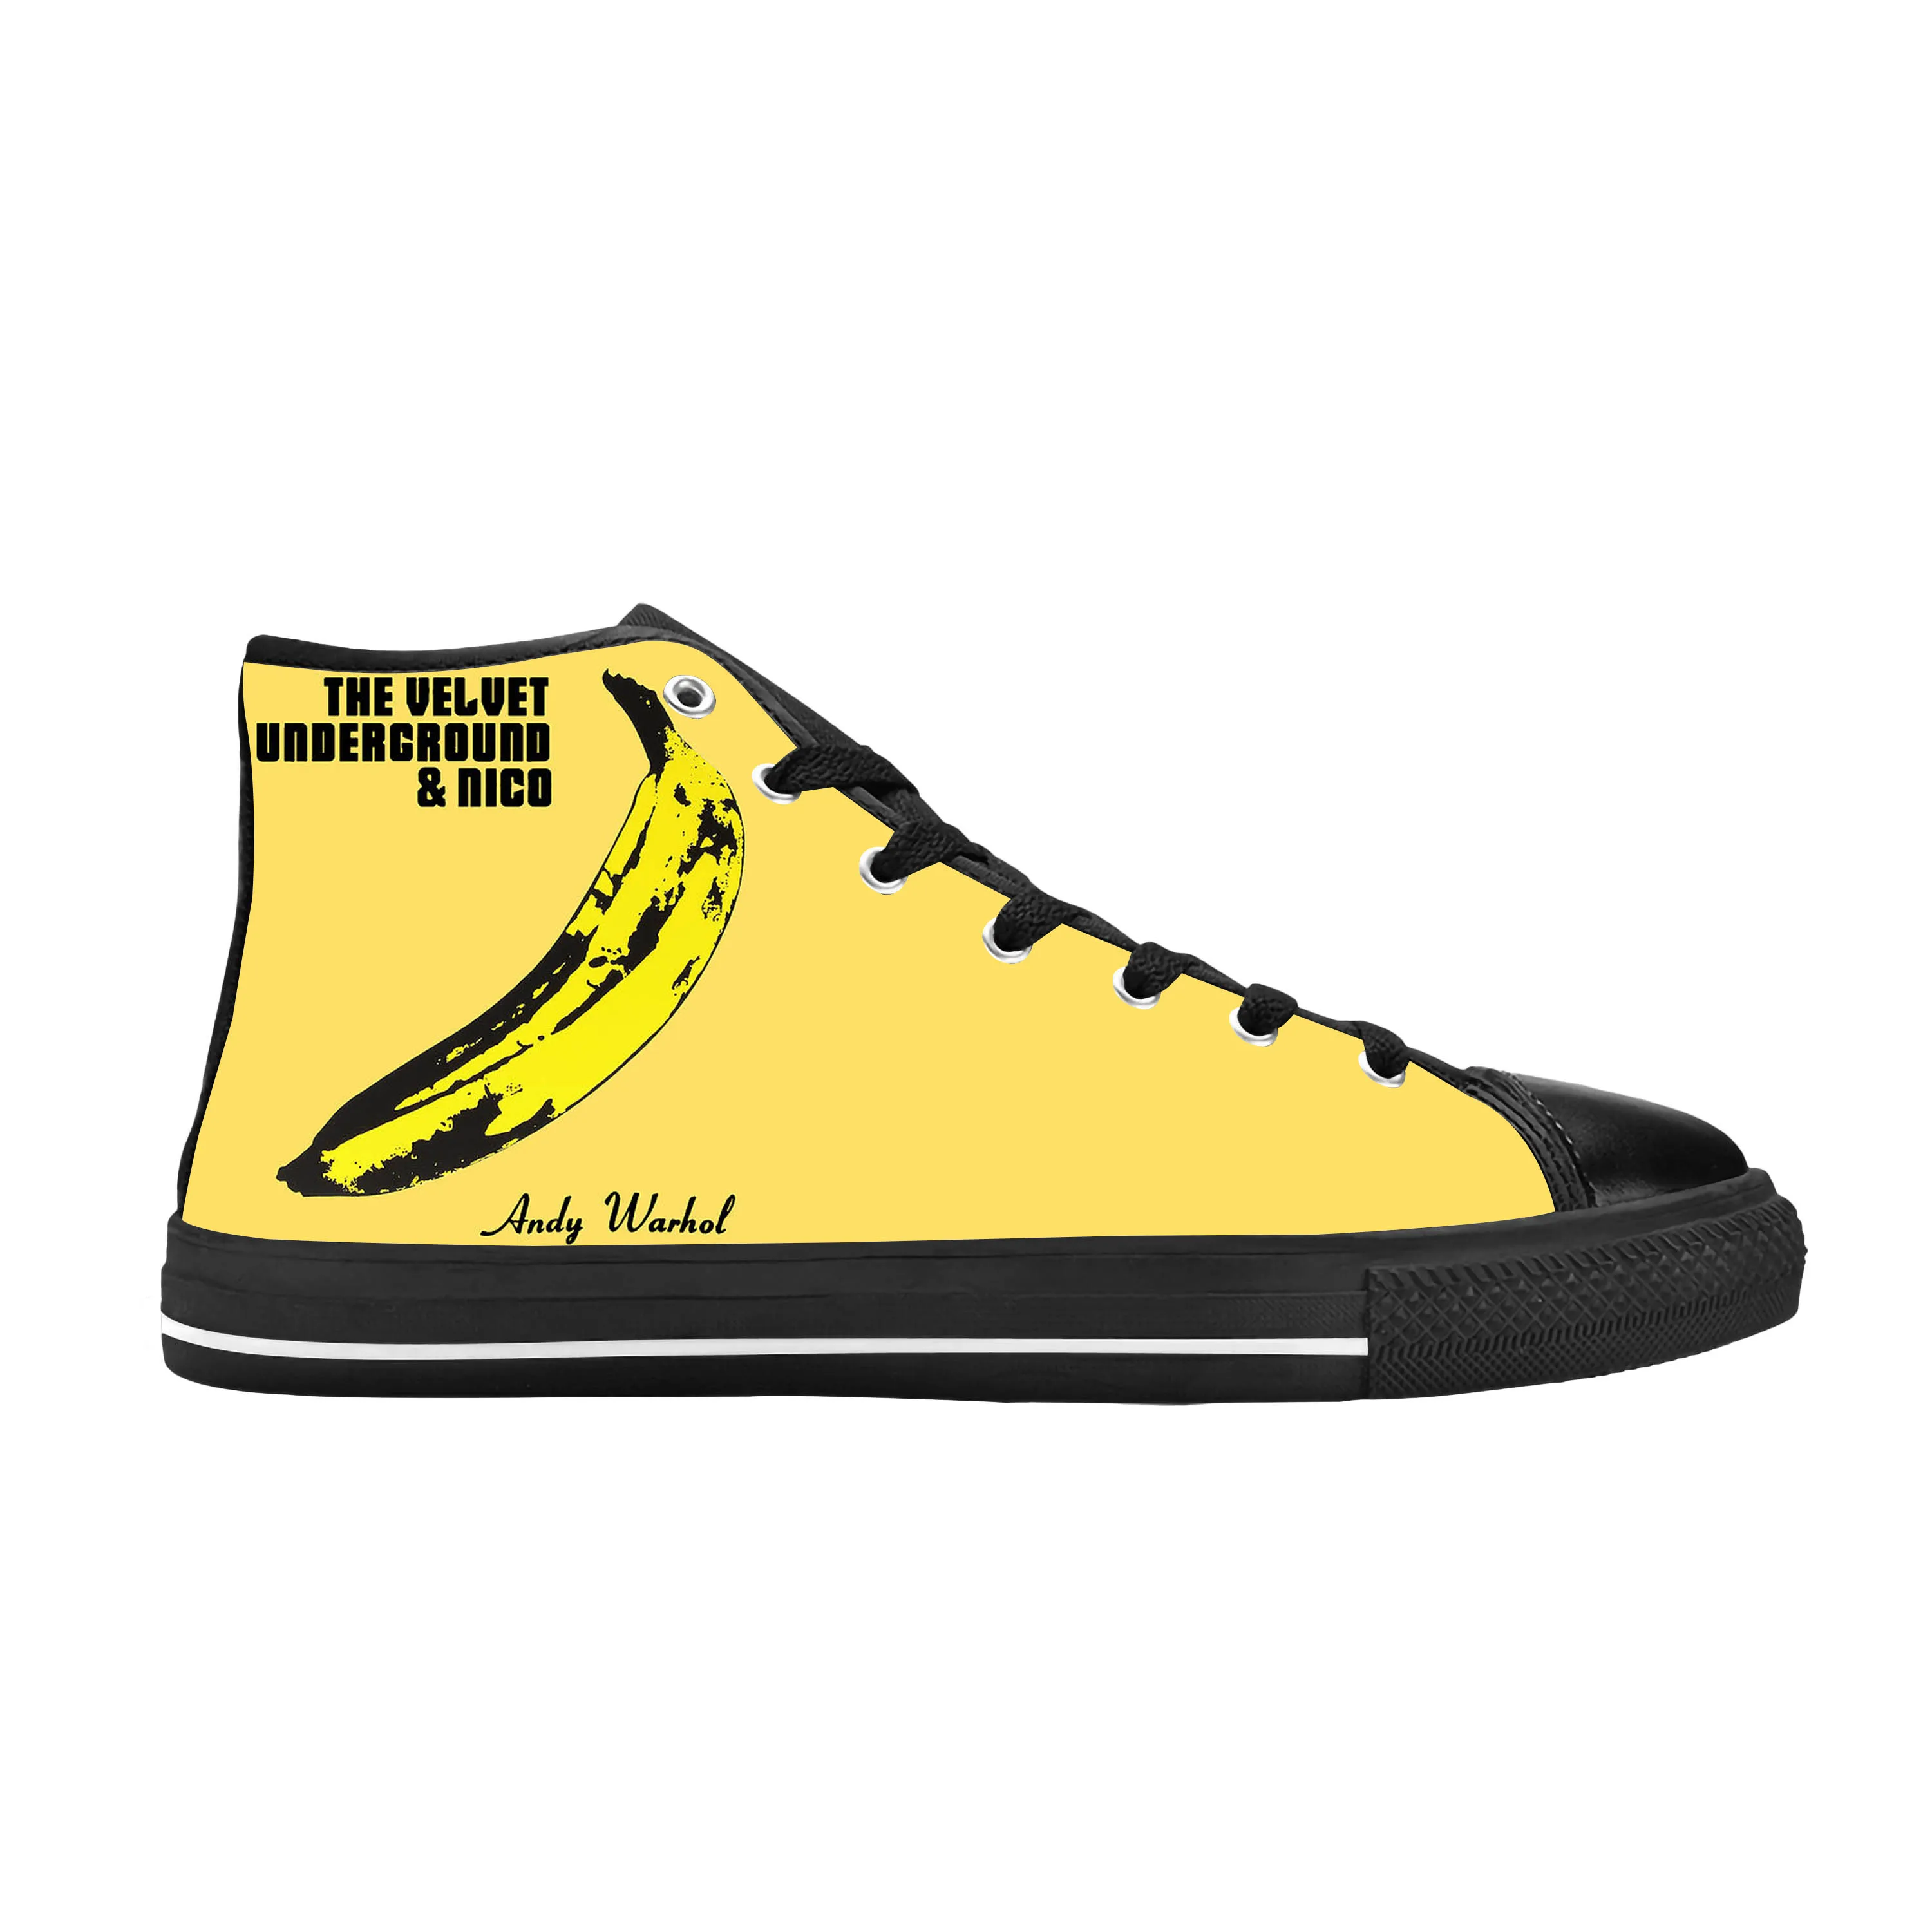 

The Velvet Underground Nico Music Rock Band Funny Casual Cloth Shoes High Top Comfortable Breathable 3D Print Men Women Sneakers